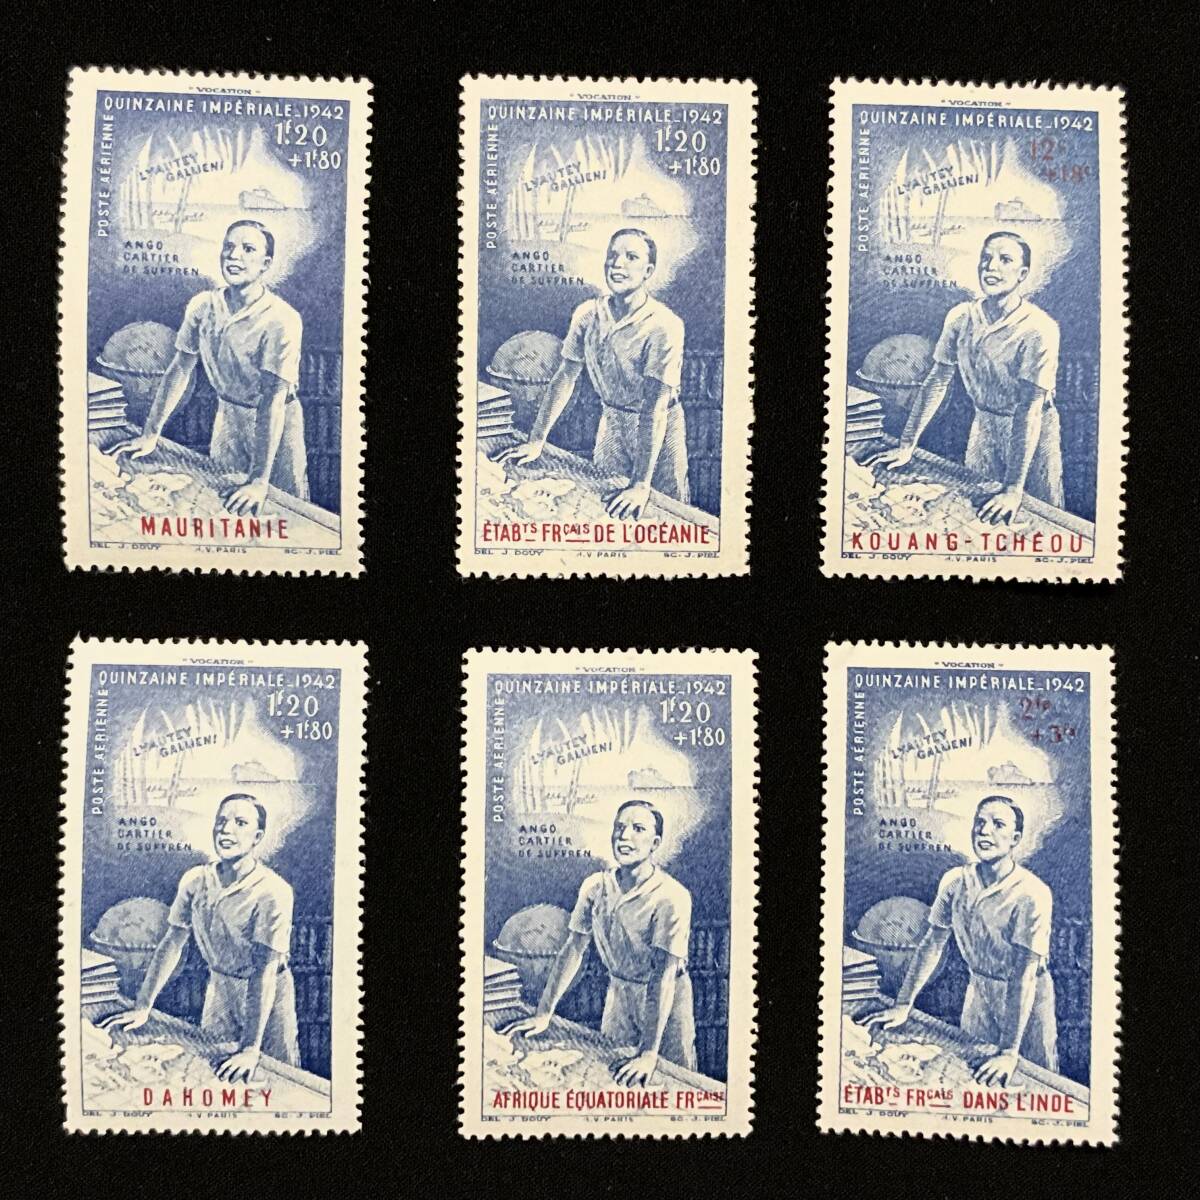  France .. ground period each country issue [. country. . week ]1942 year issue unused stamp 